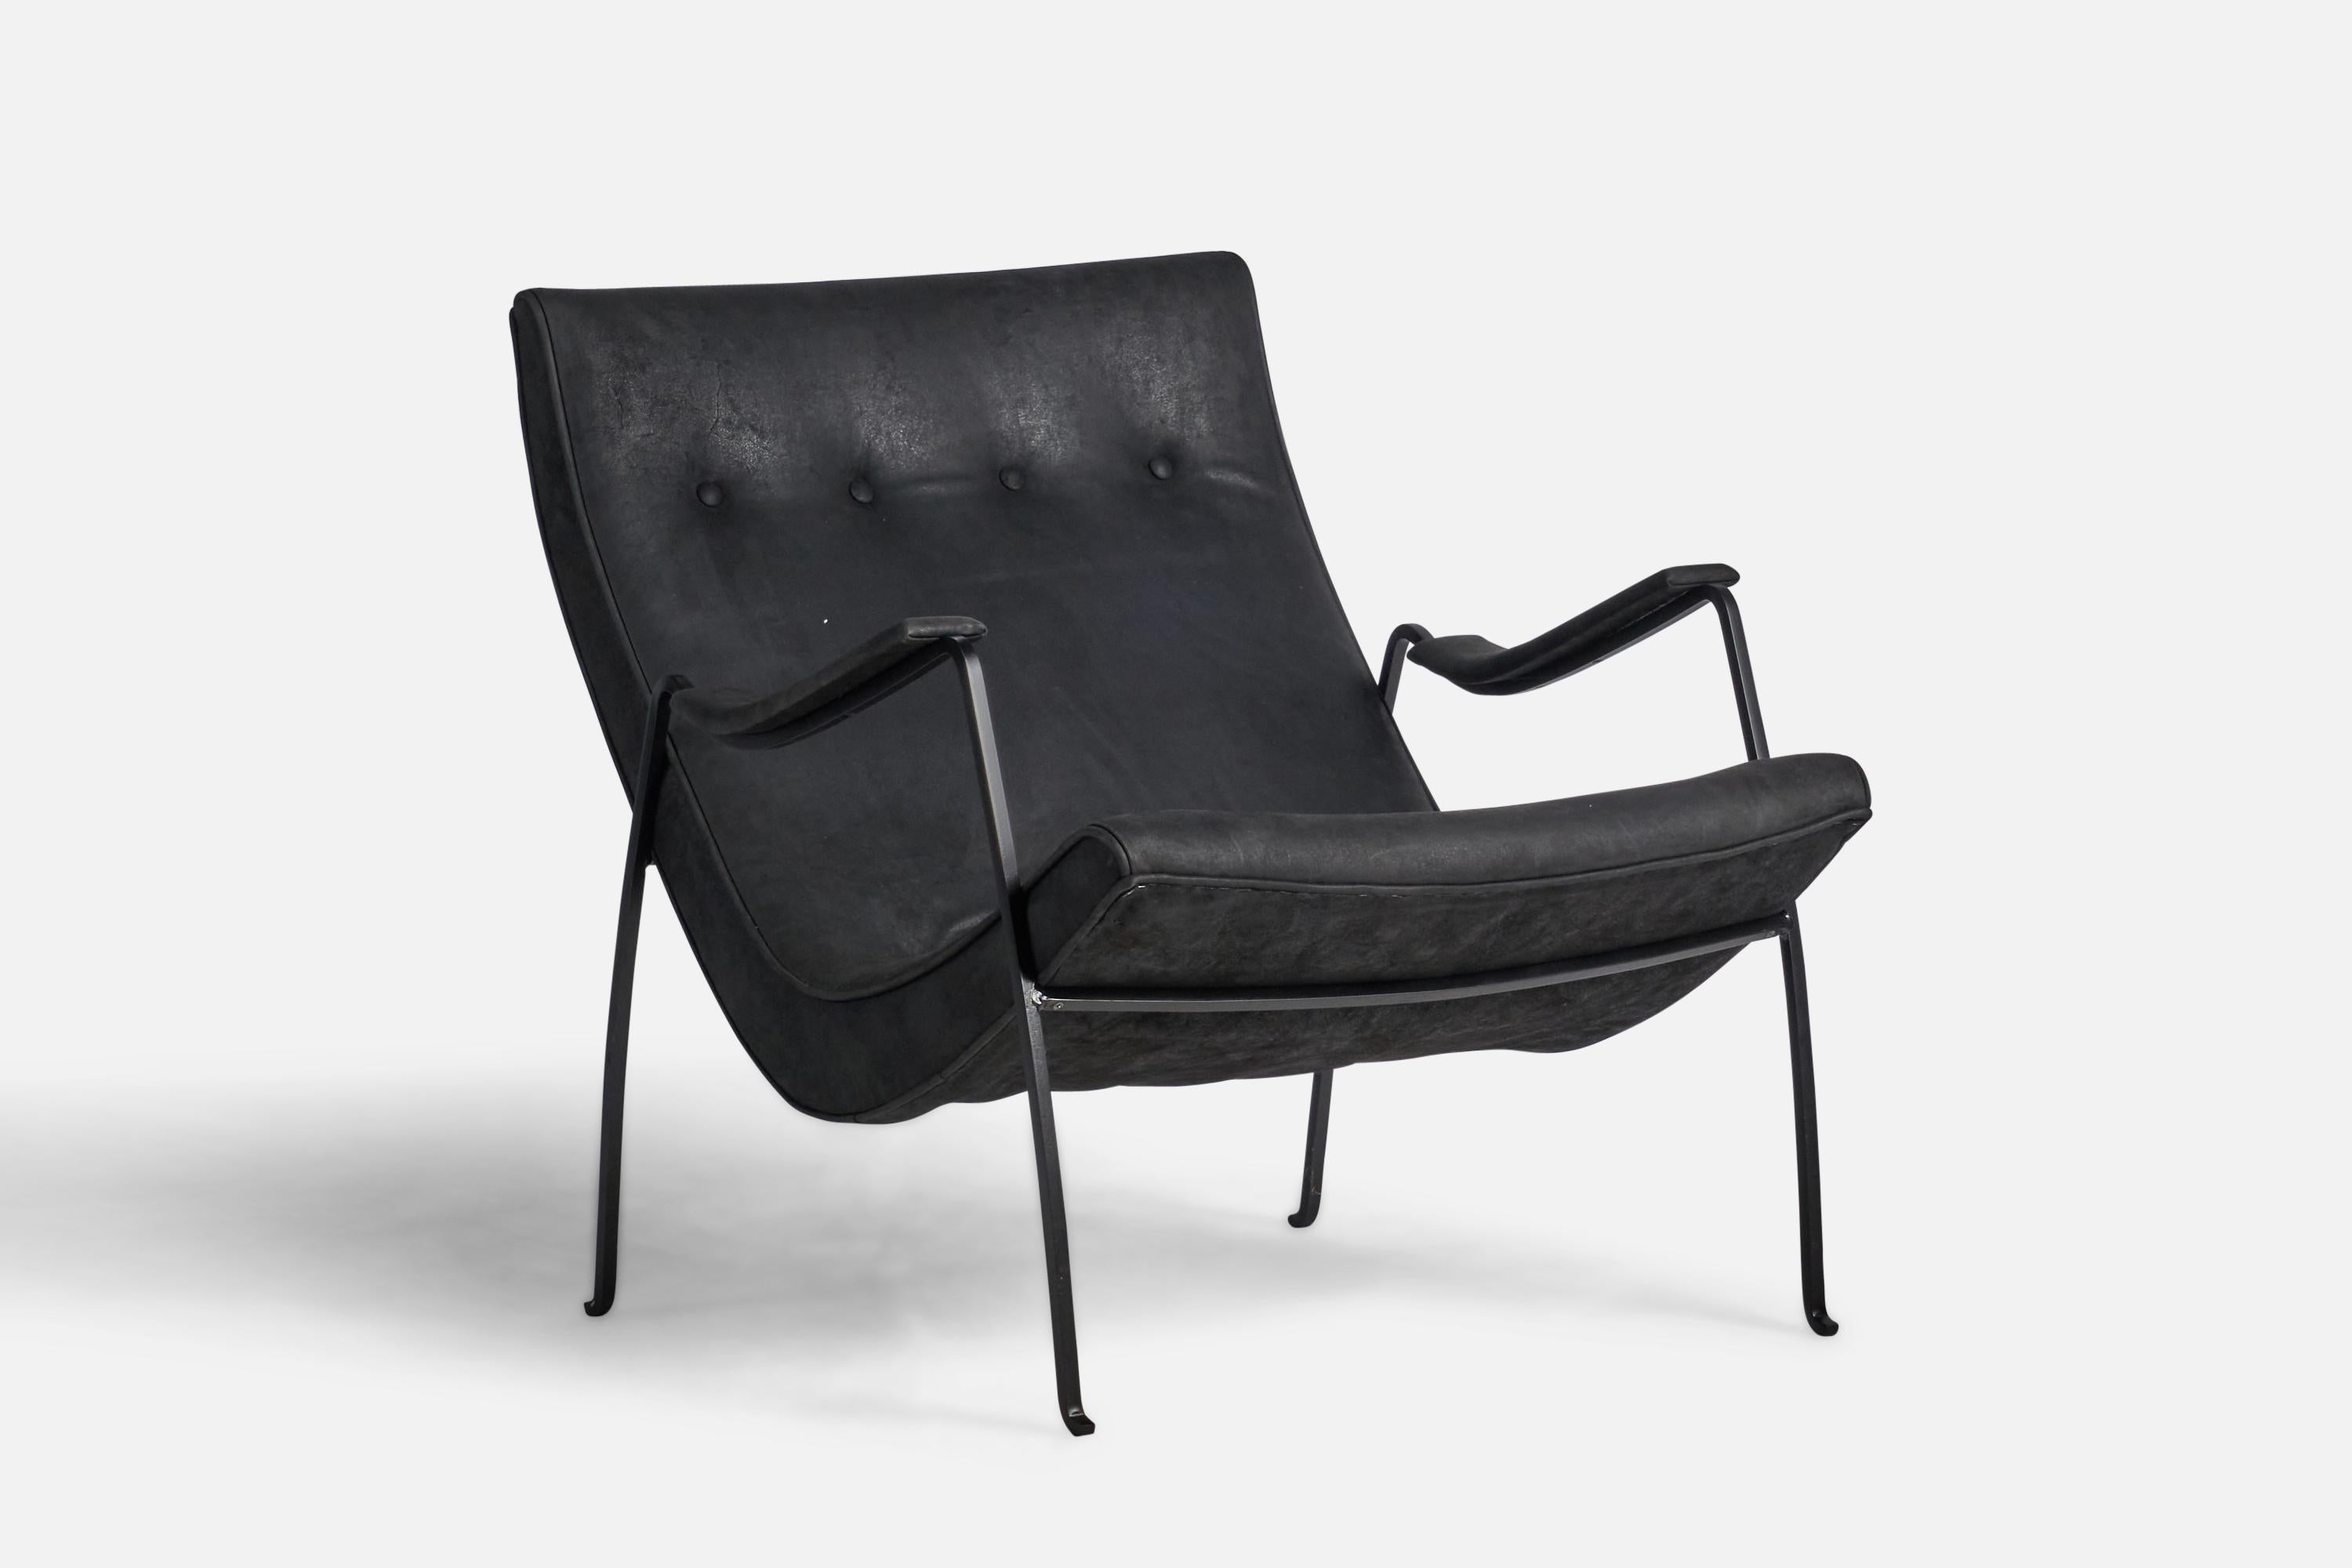 A black-lacquered metal and black leather lounge chair designed by Milo Baughman and produced by Thayer Coggin, High Point, North Carolina, USA, 1960s.